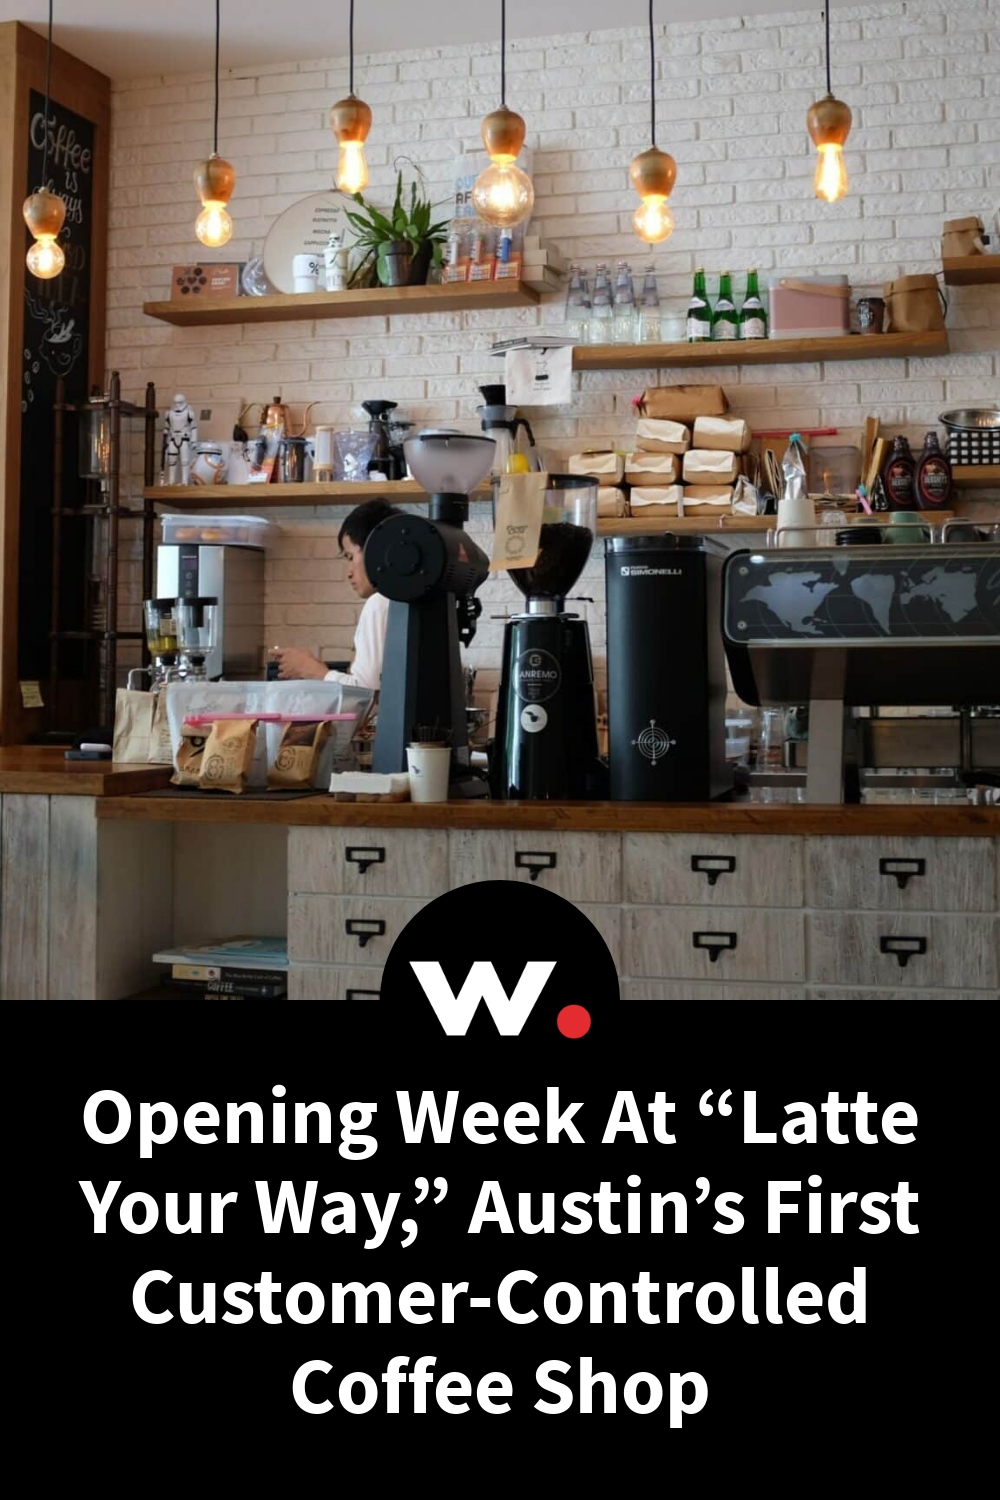 Opening Week At “Latte Your Way,” Austin’s First Customer-Controlled Coffee Shop